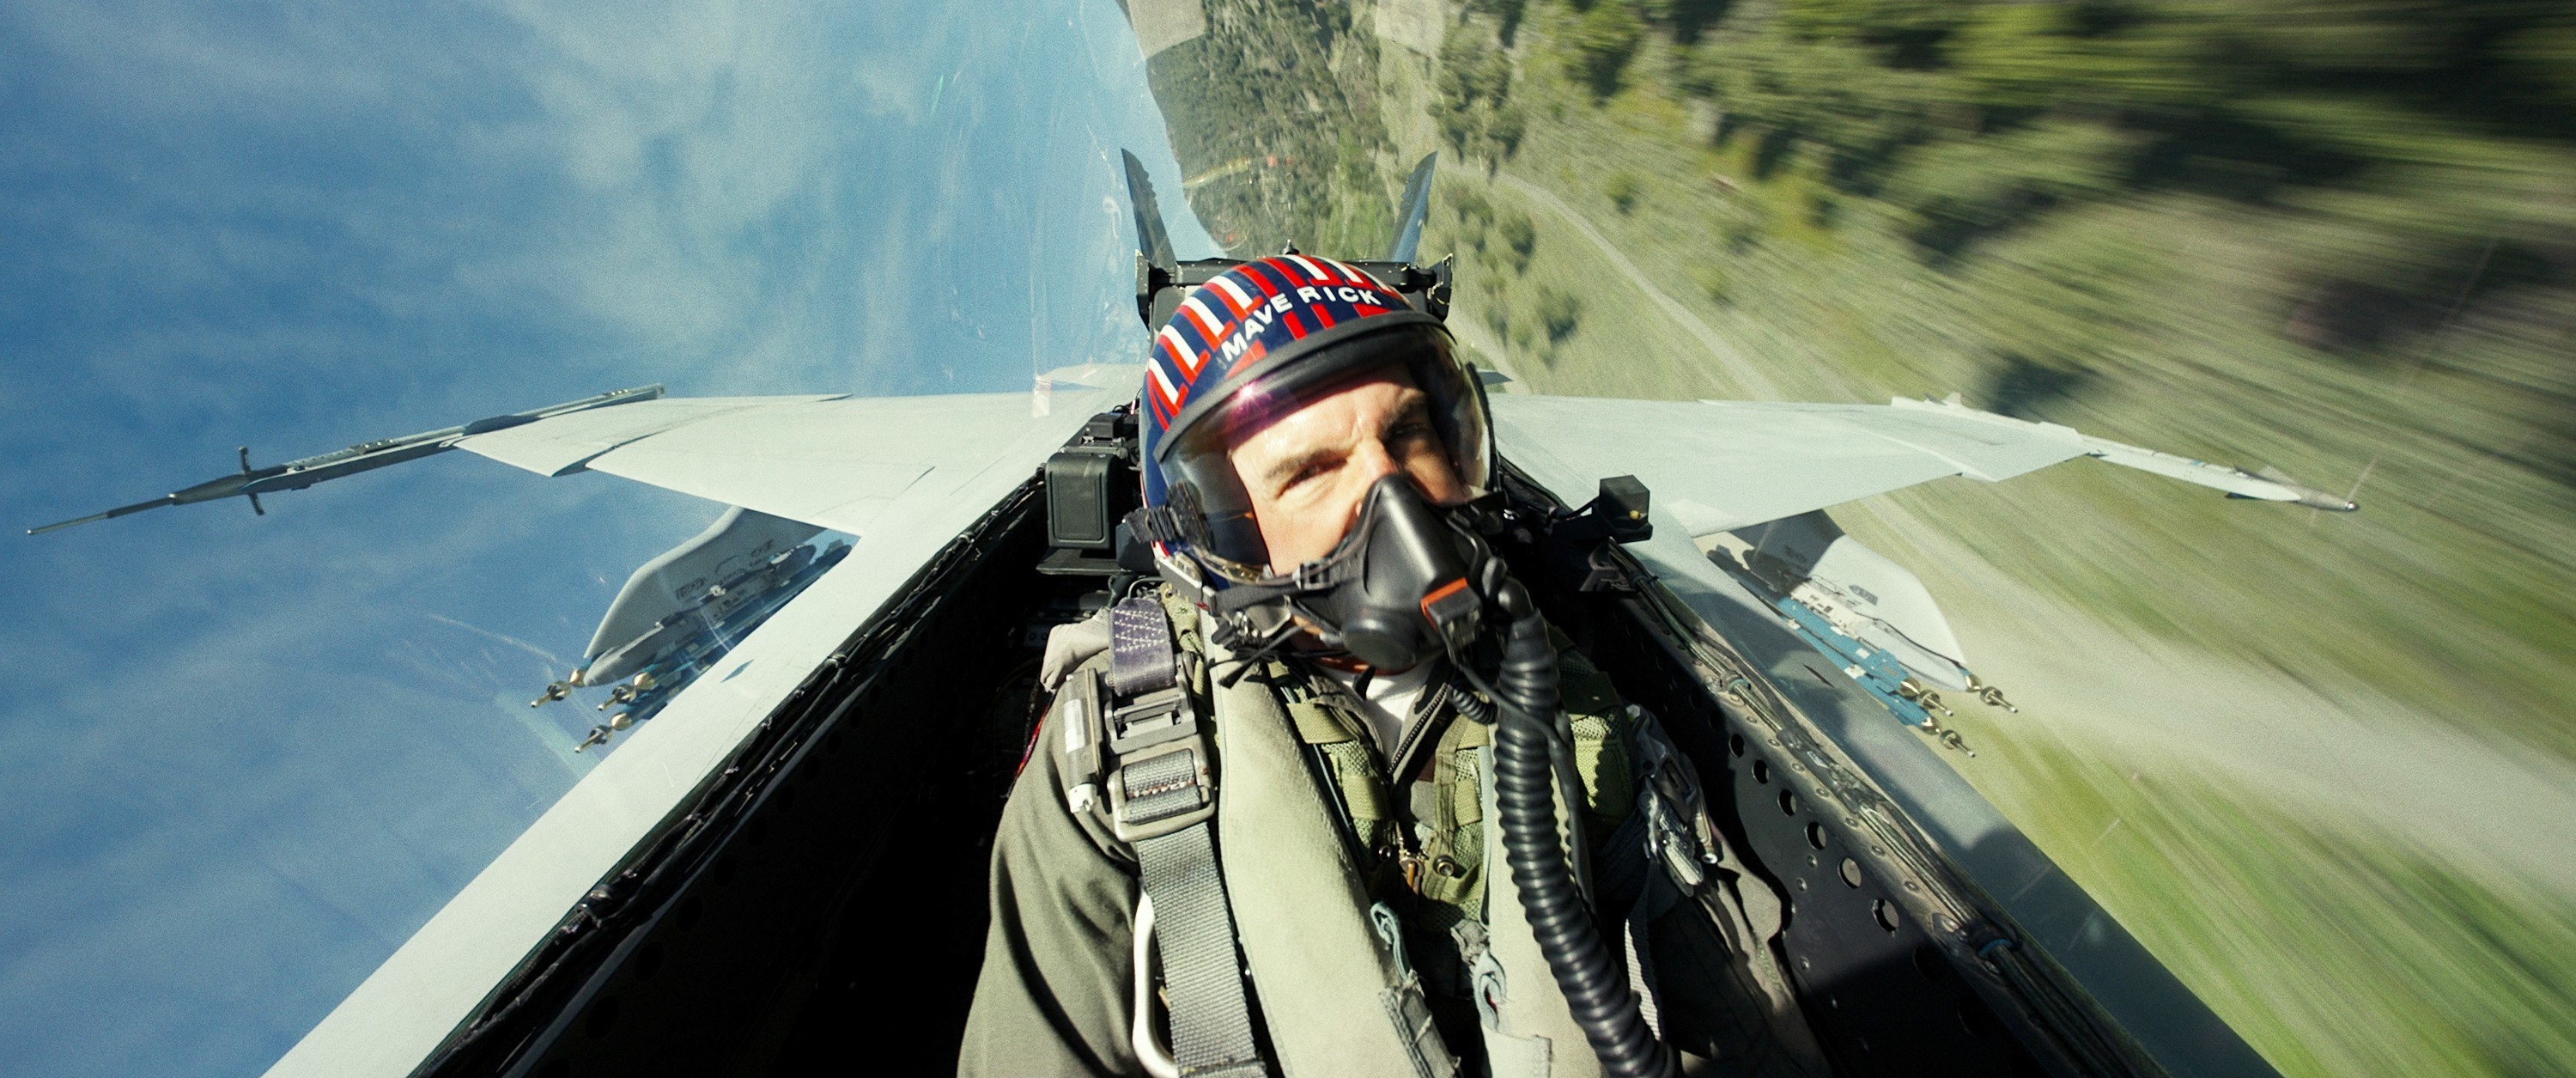 Tom Cruise piloting a plane and wearing a respirator